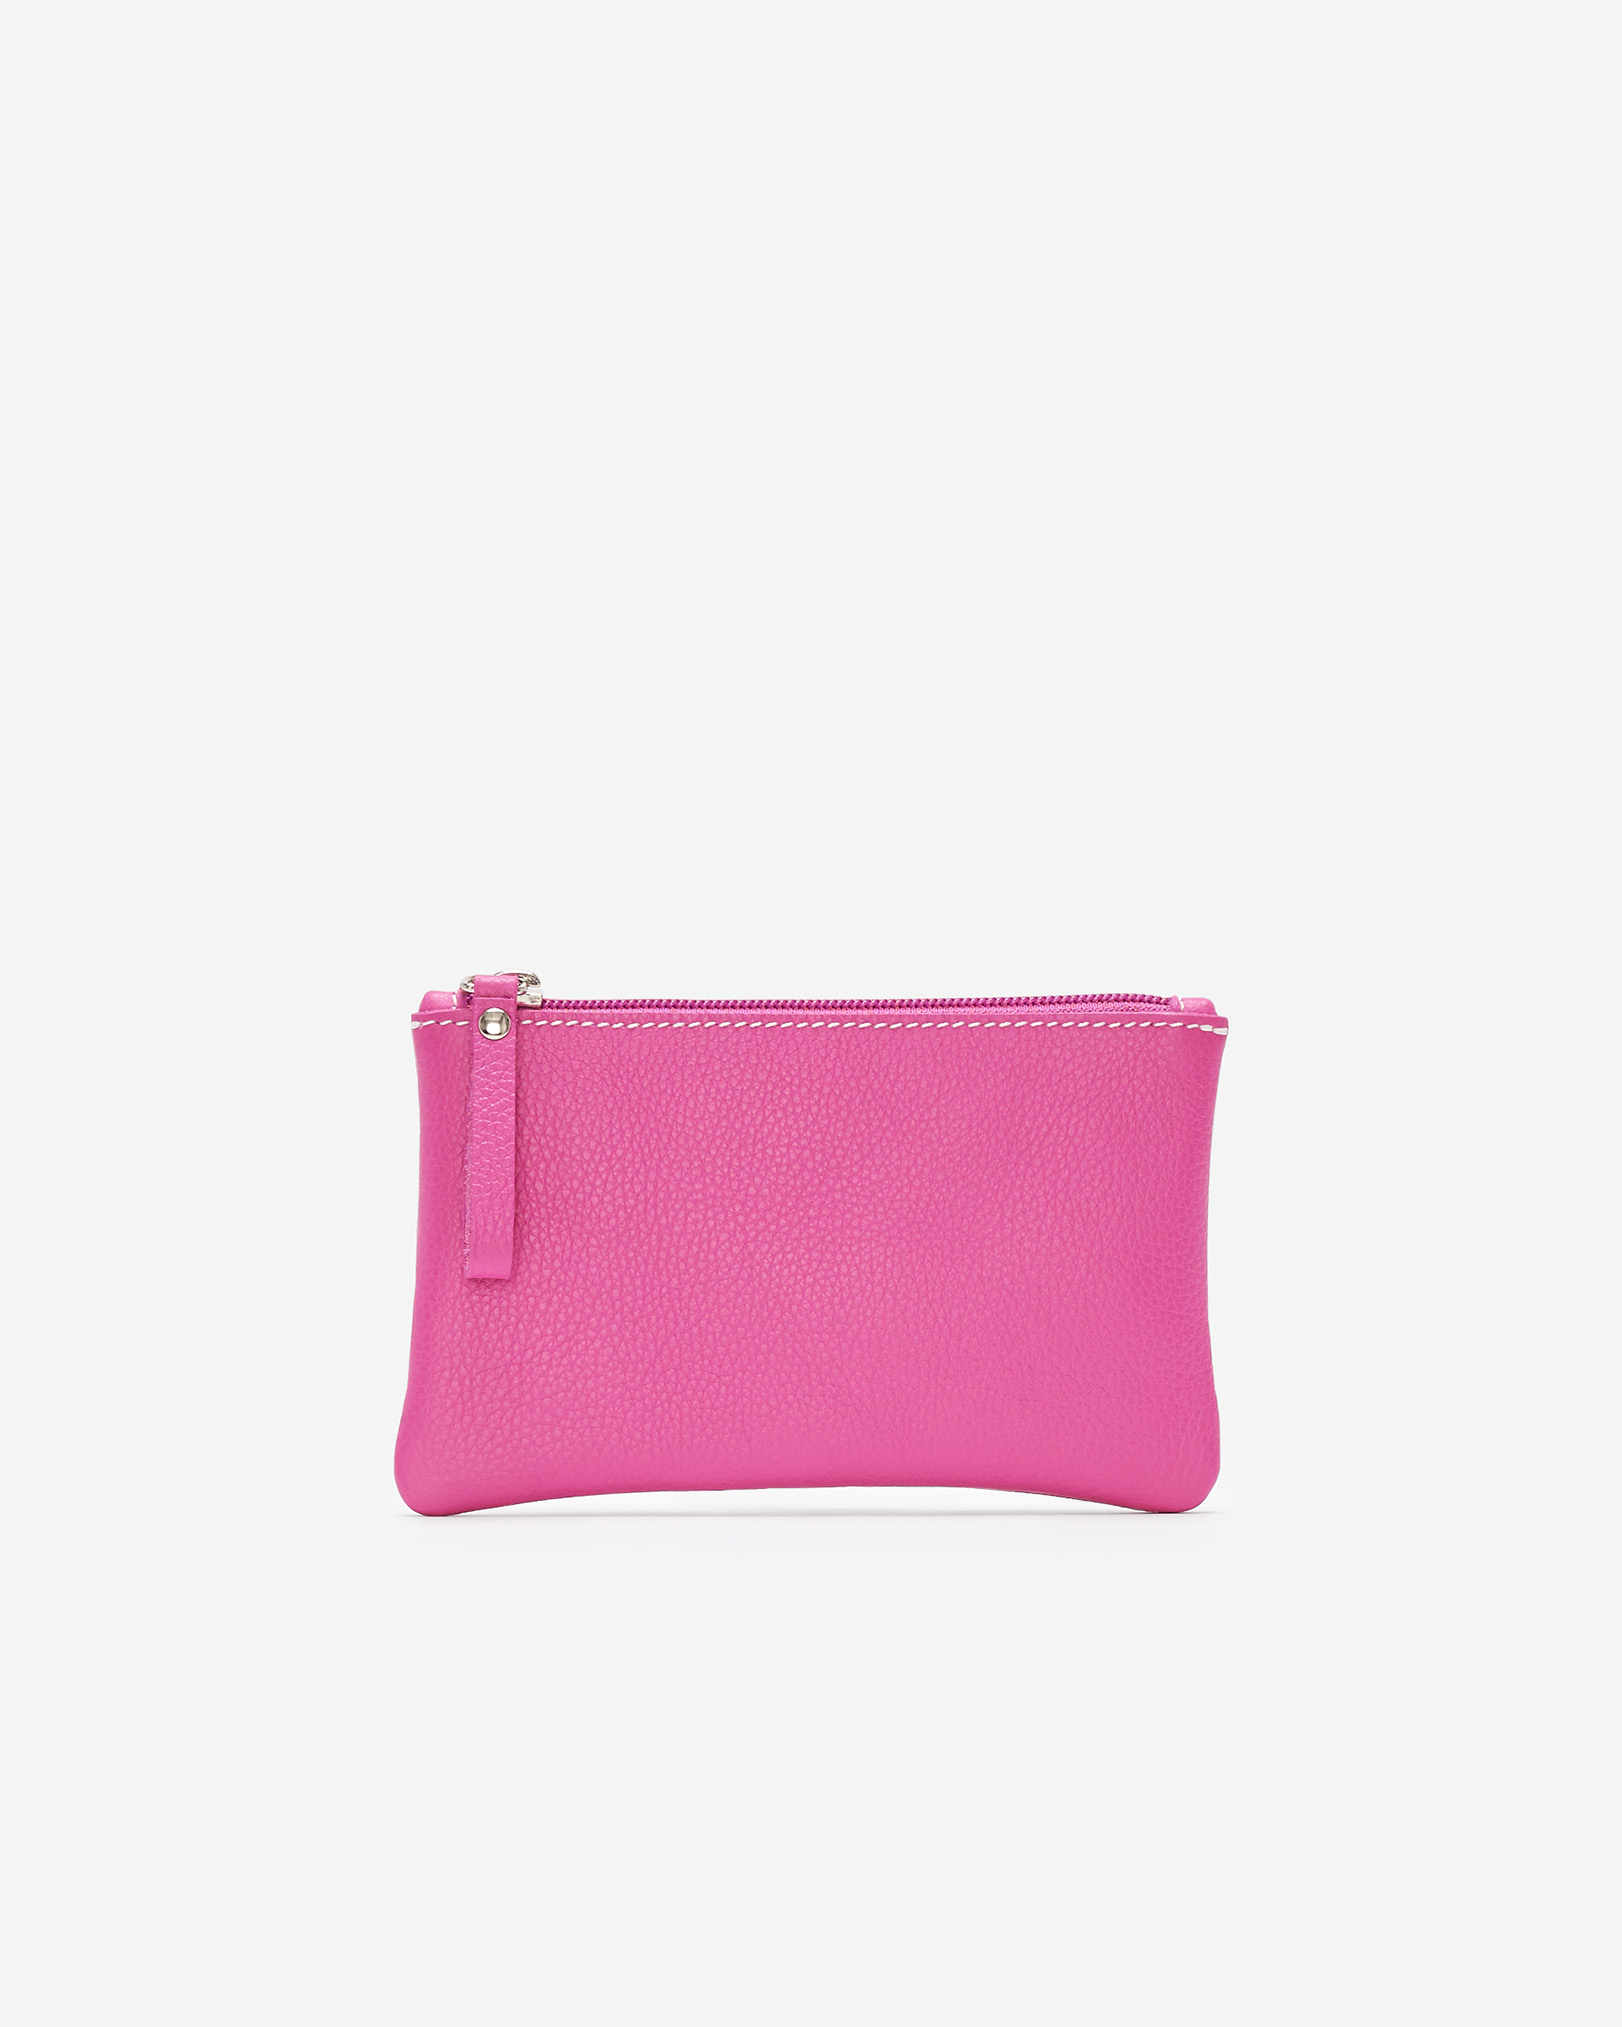 Roots Zip Pouch Cervino in Pink Orchid